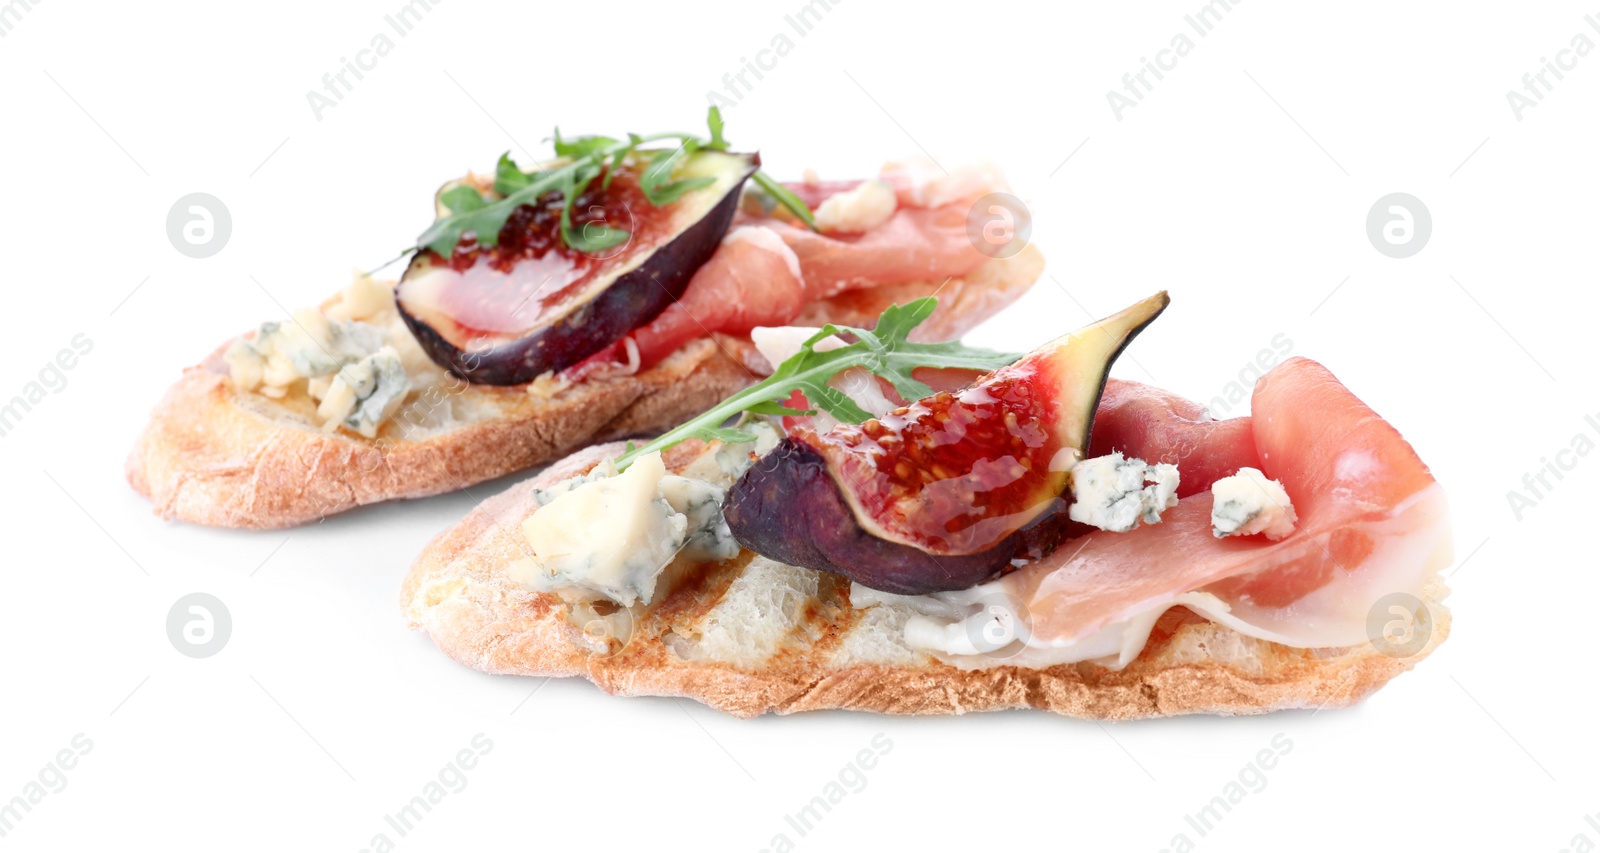 Photo of Sandwiches with ripe figs and prosciutto on white background